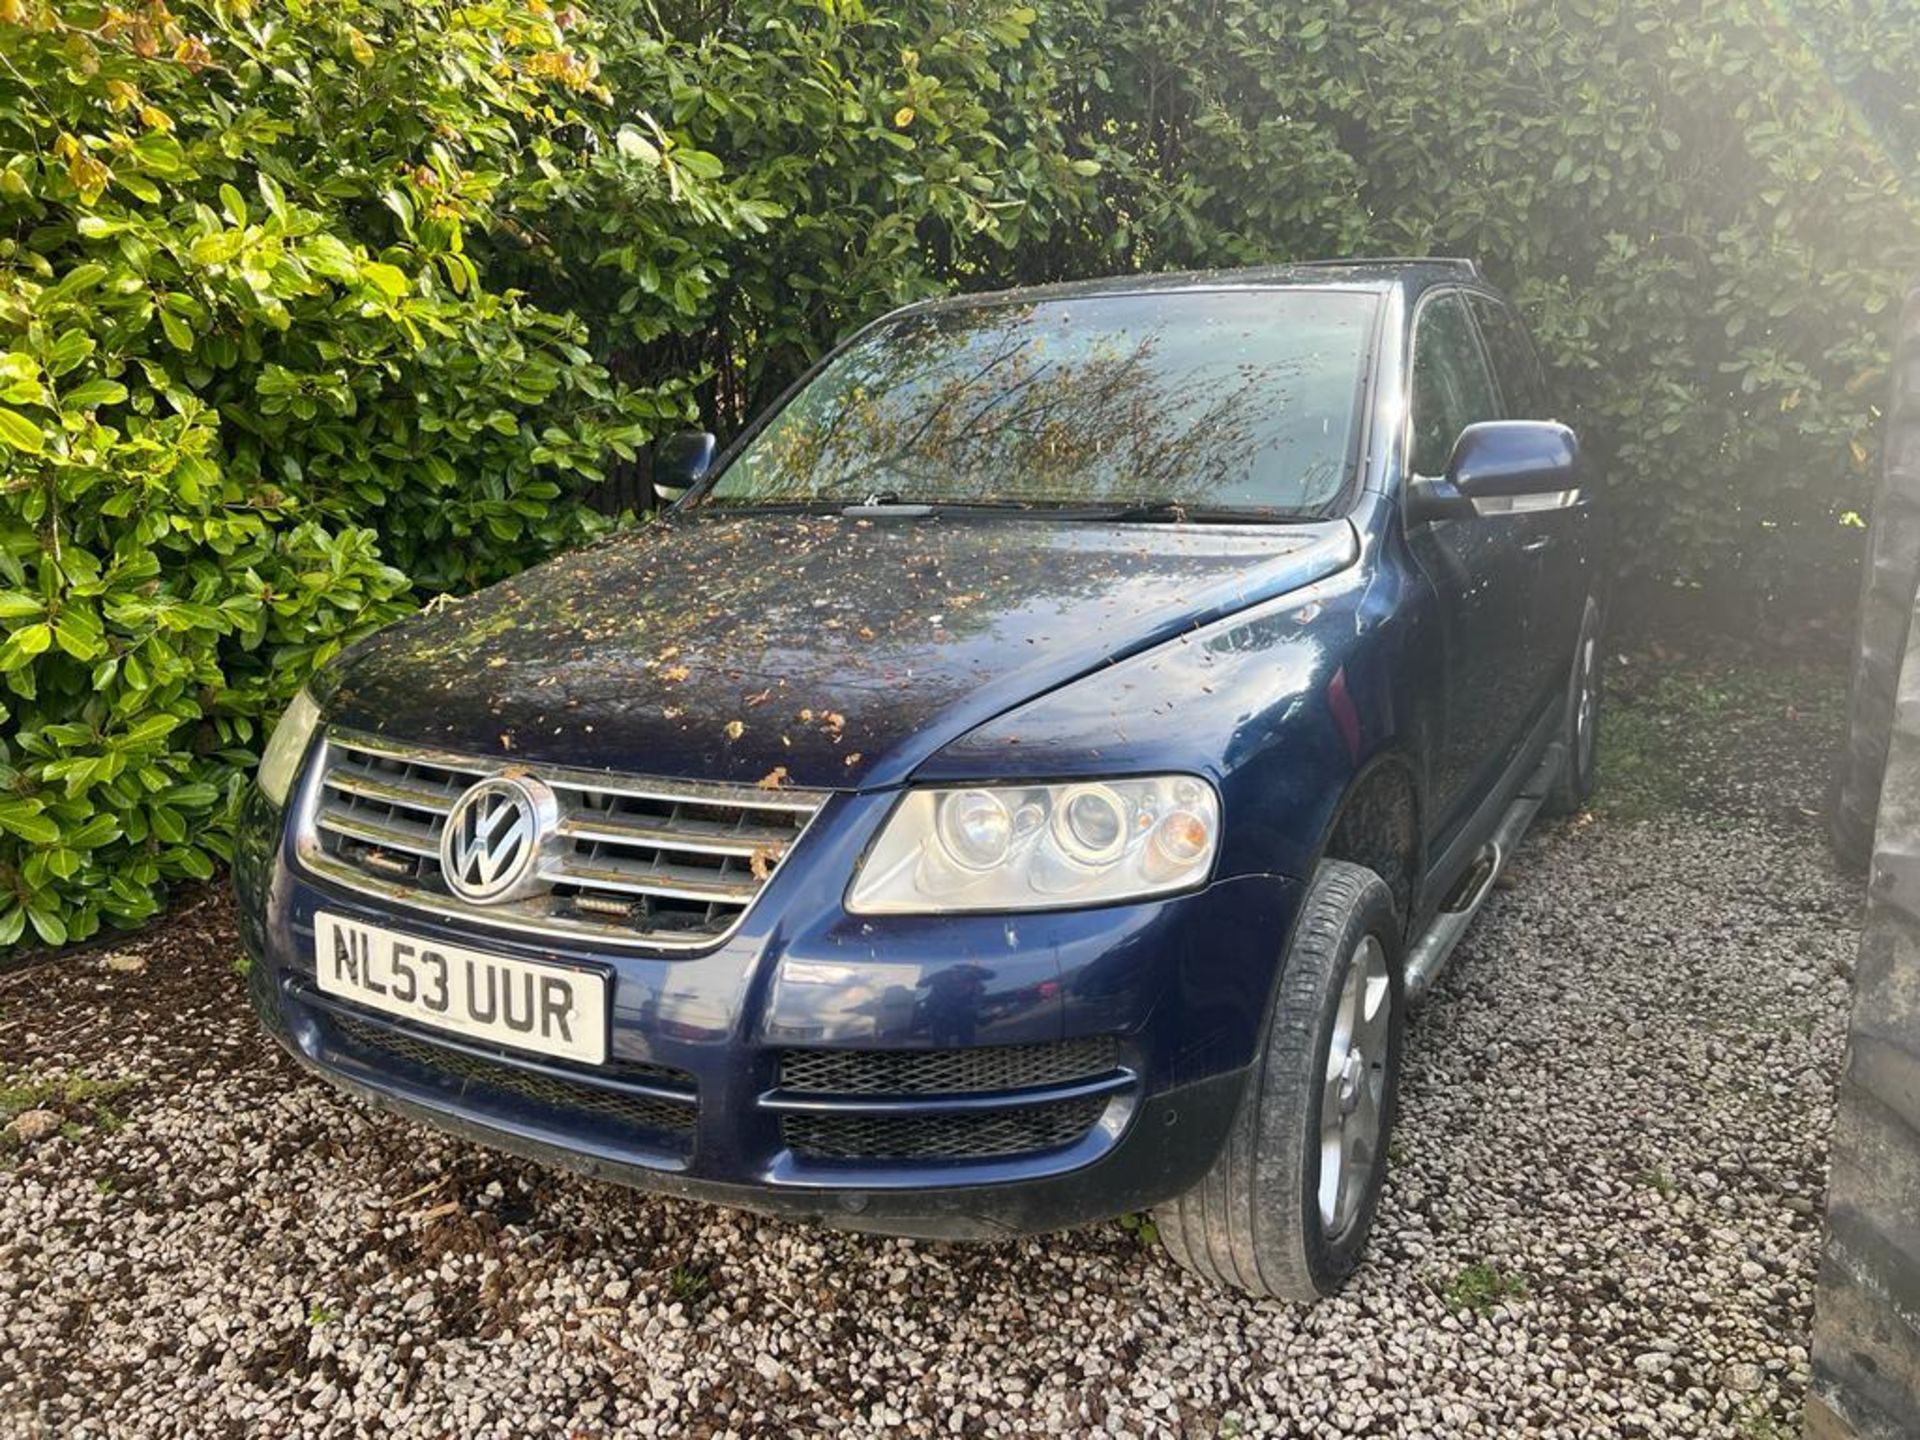 A VW TOUAREG NL53UUR MANUAL FIRST REG 2003 MOT 26/03/24 APPROX 168825 MILES TO BE SOLD WITHOUT LOG